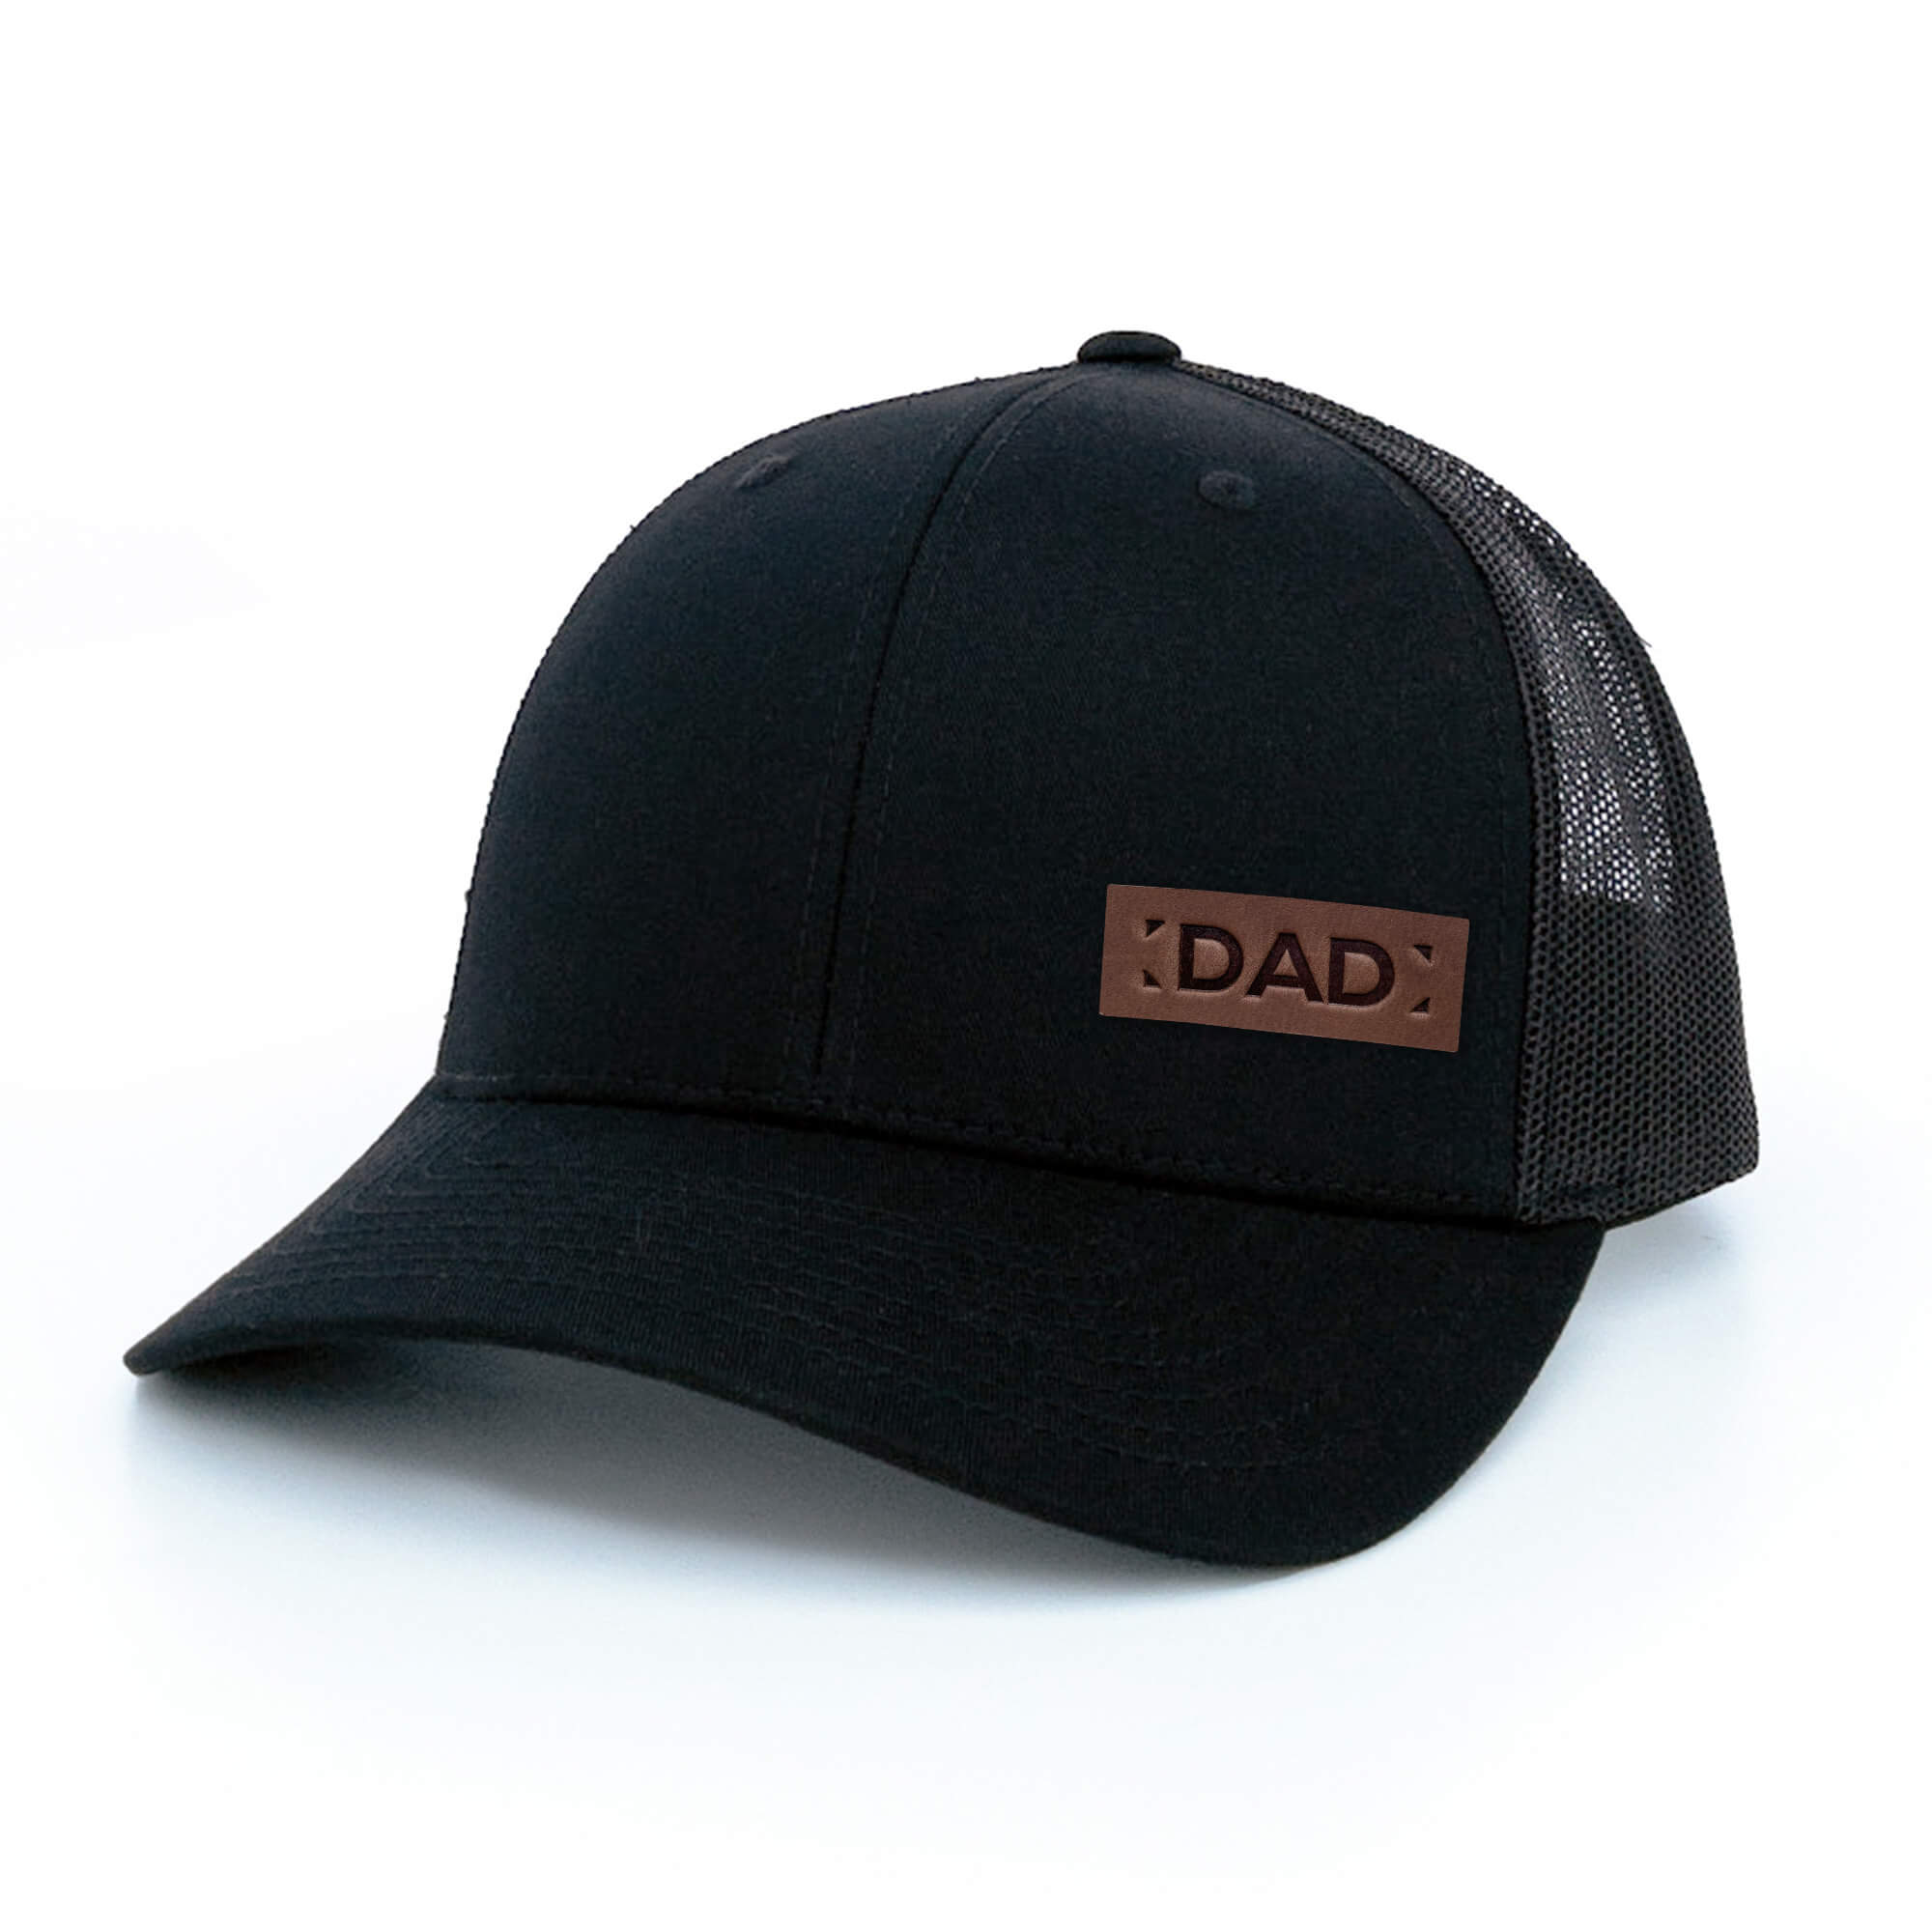 DAD - Leather Patch Hat